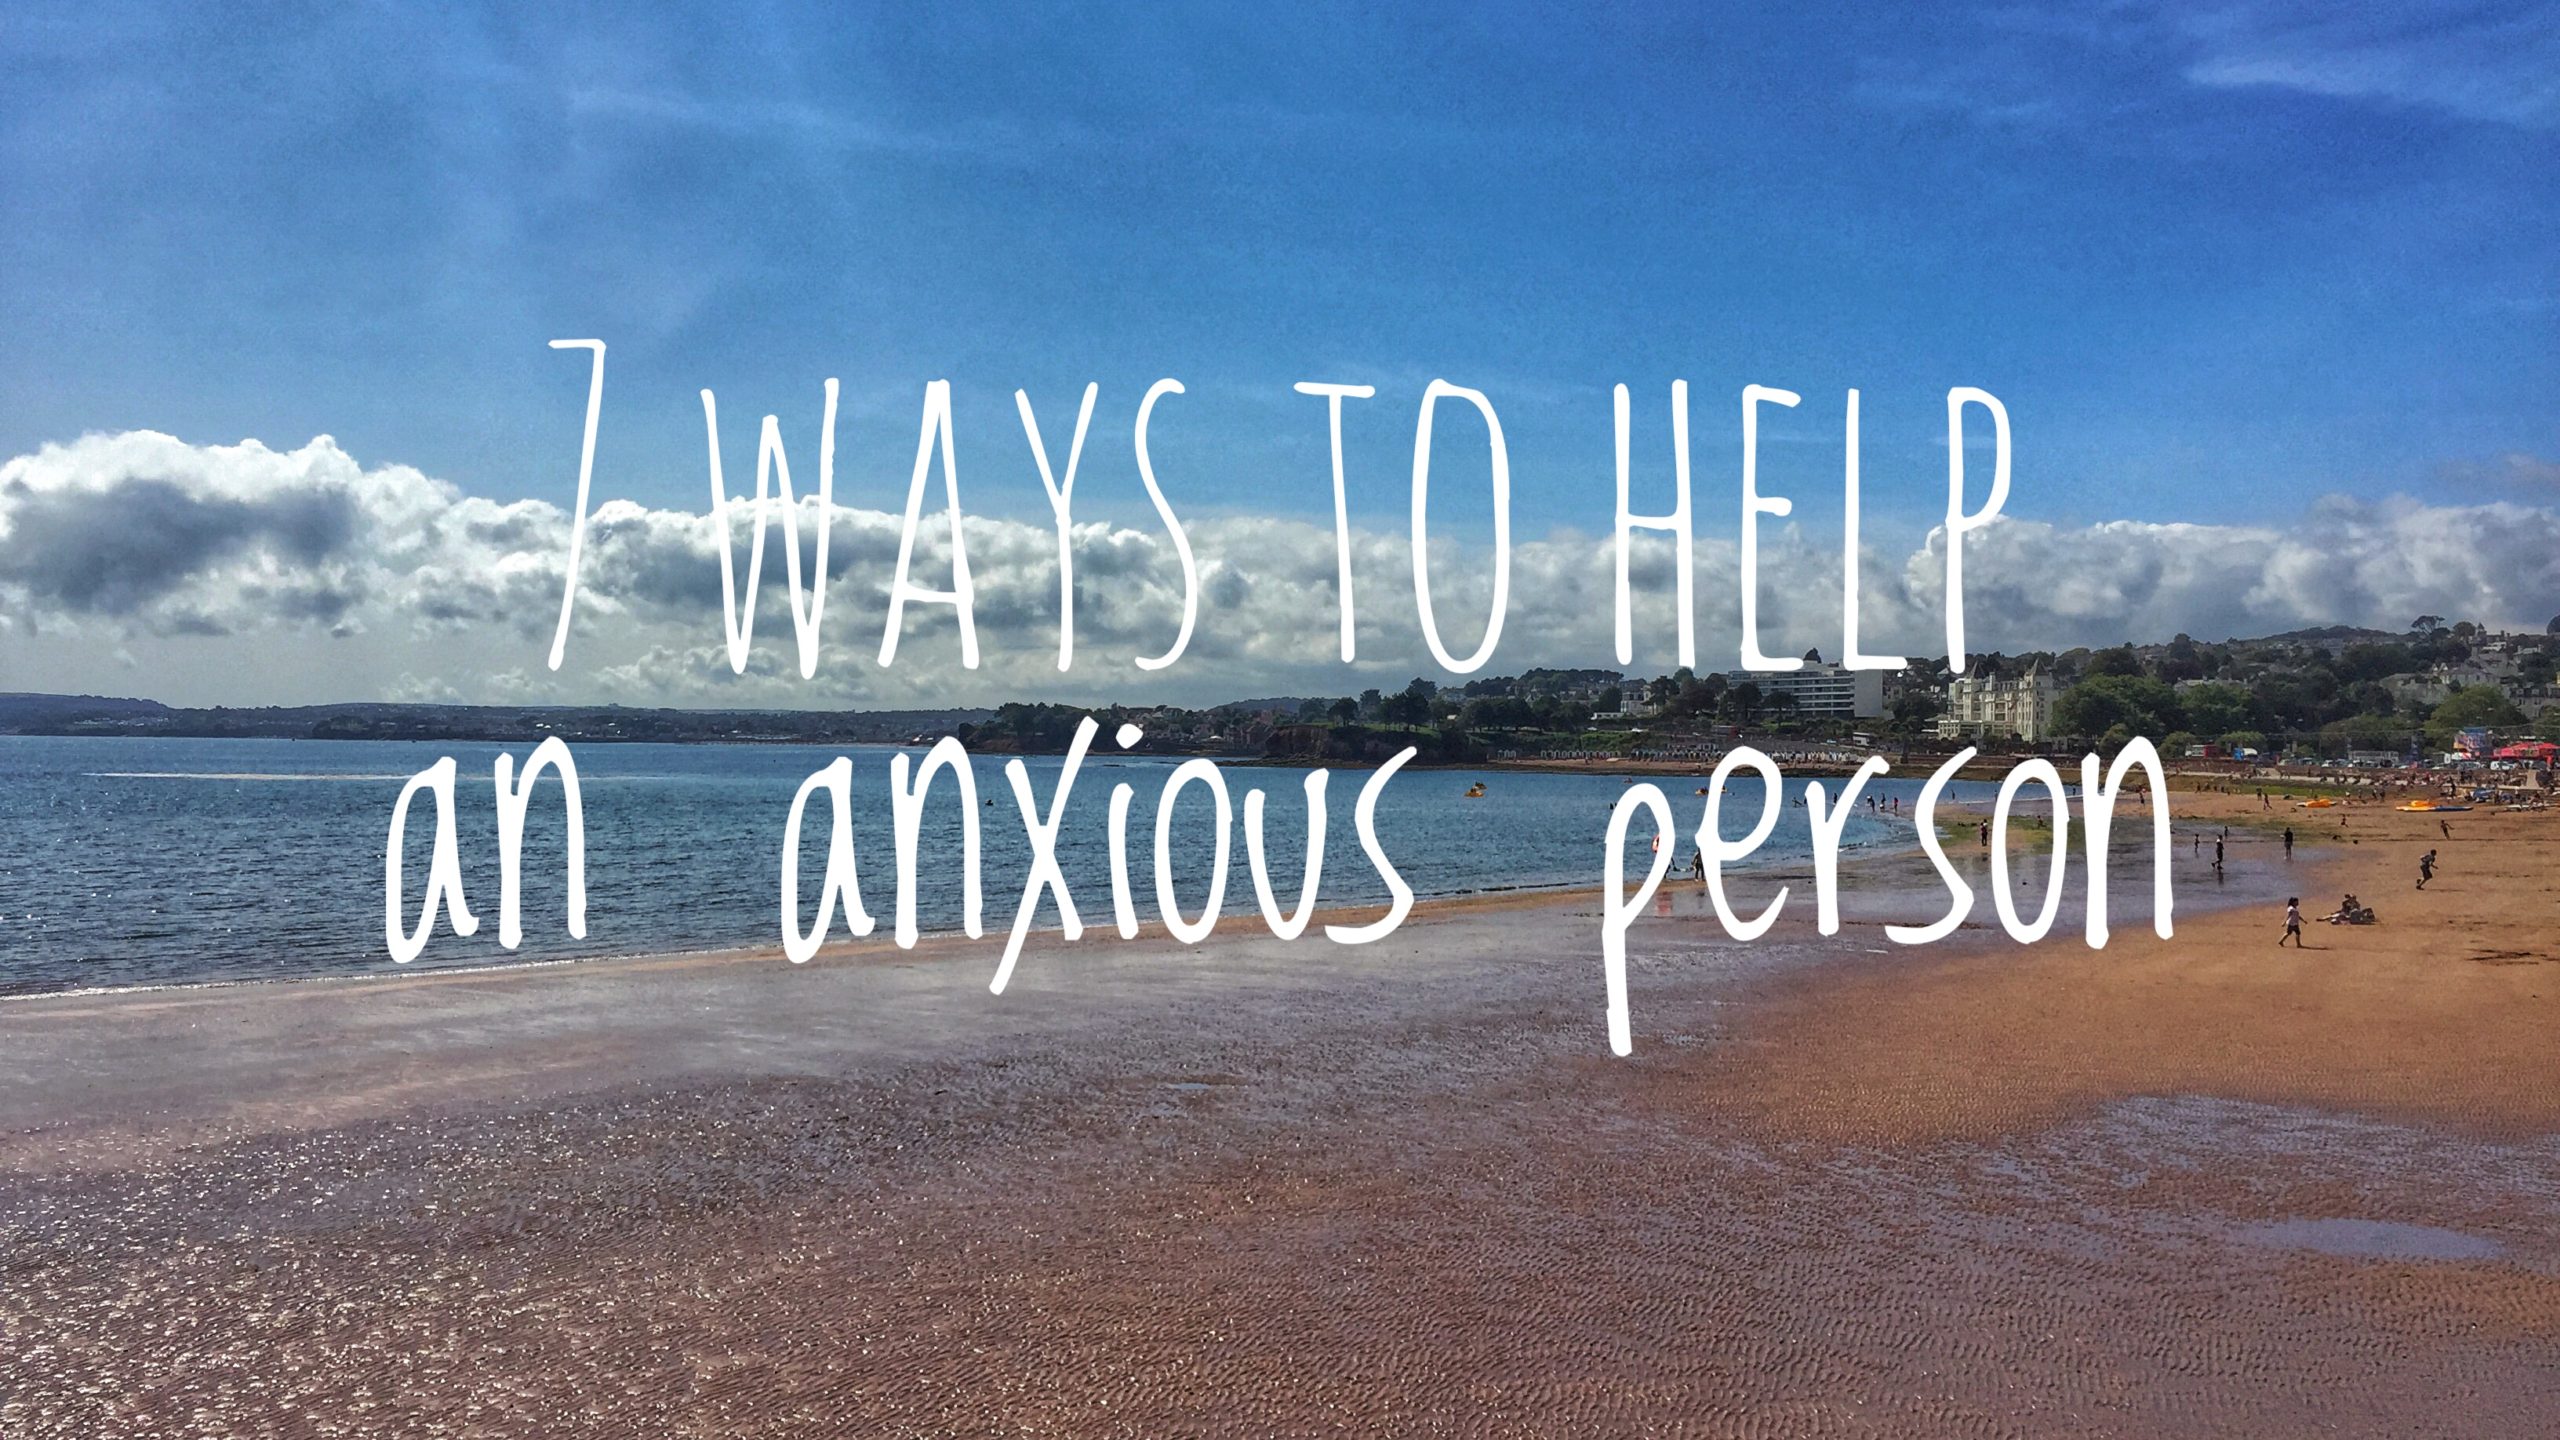 7 ways to help an anxious person